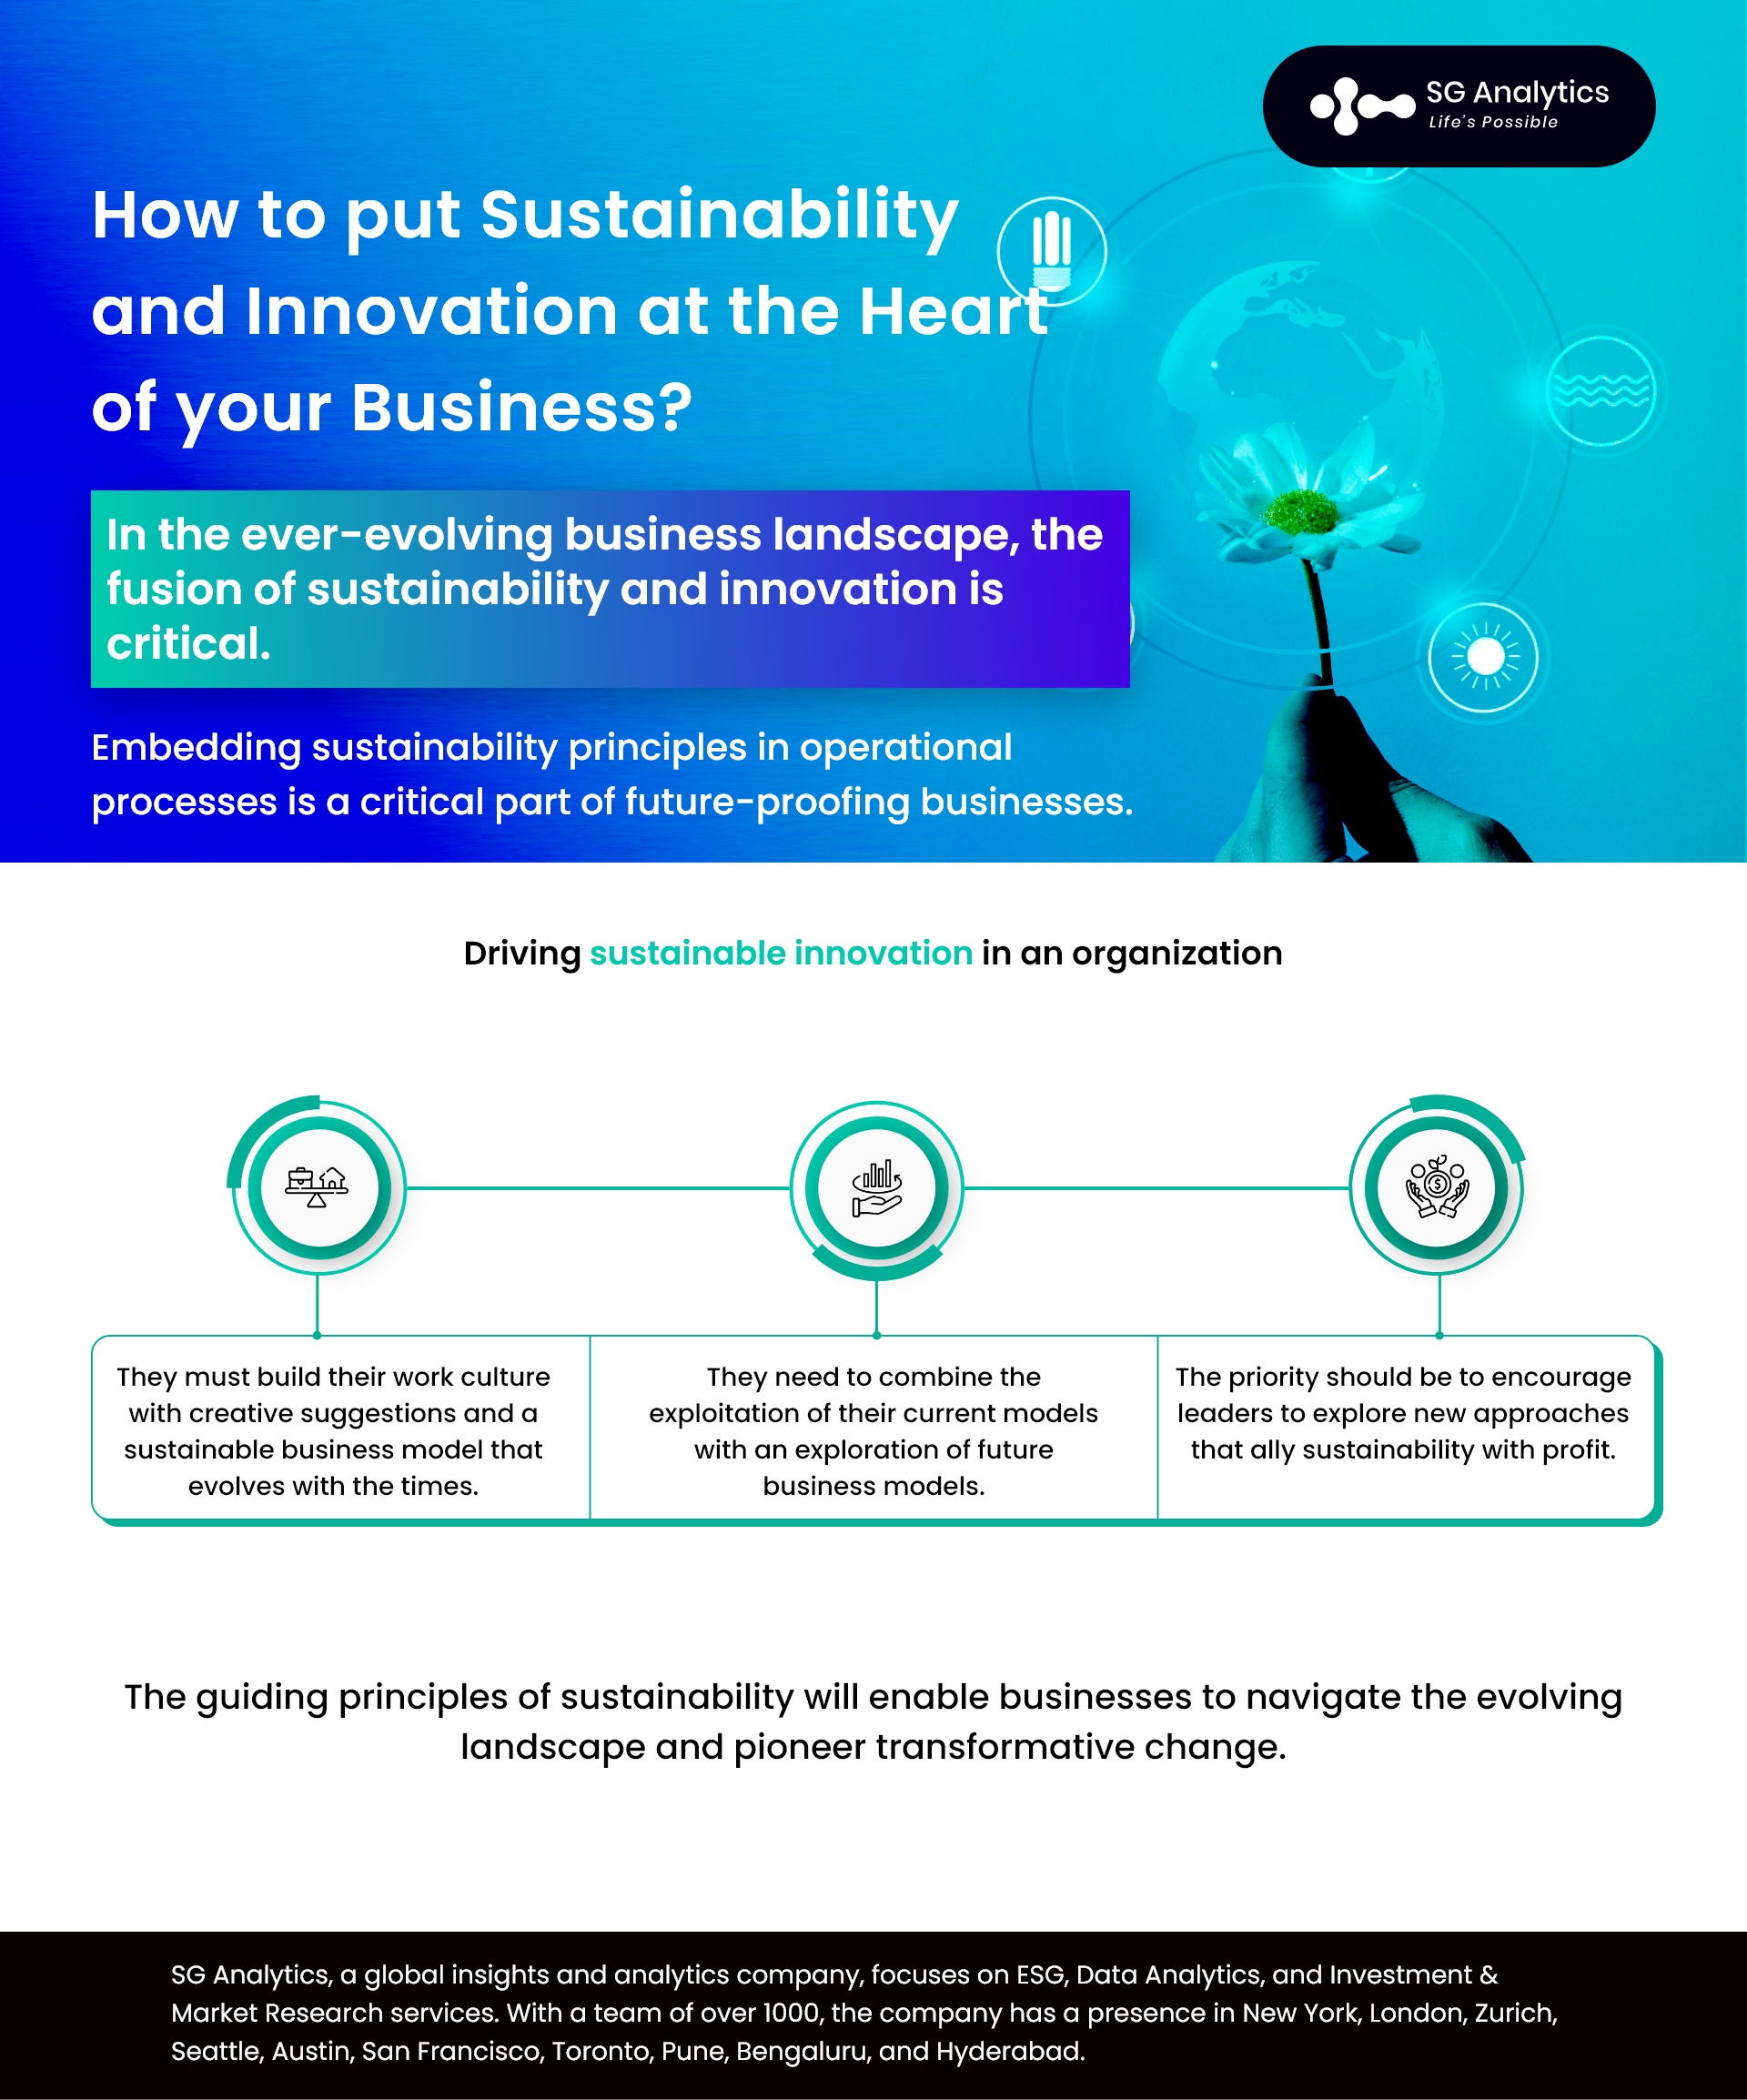 How to put Sustainability and Innovation at the Heart of your Business